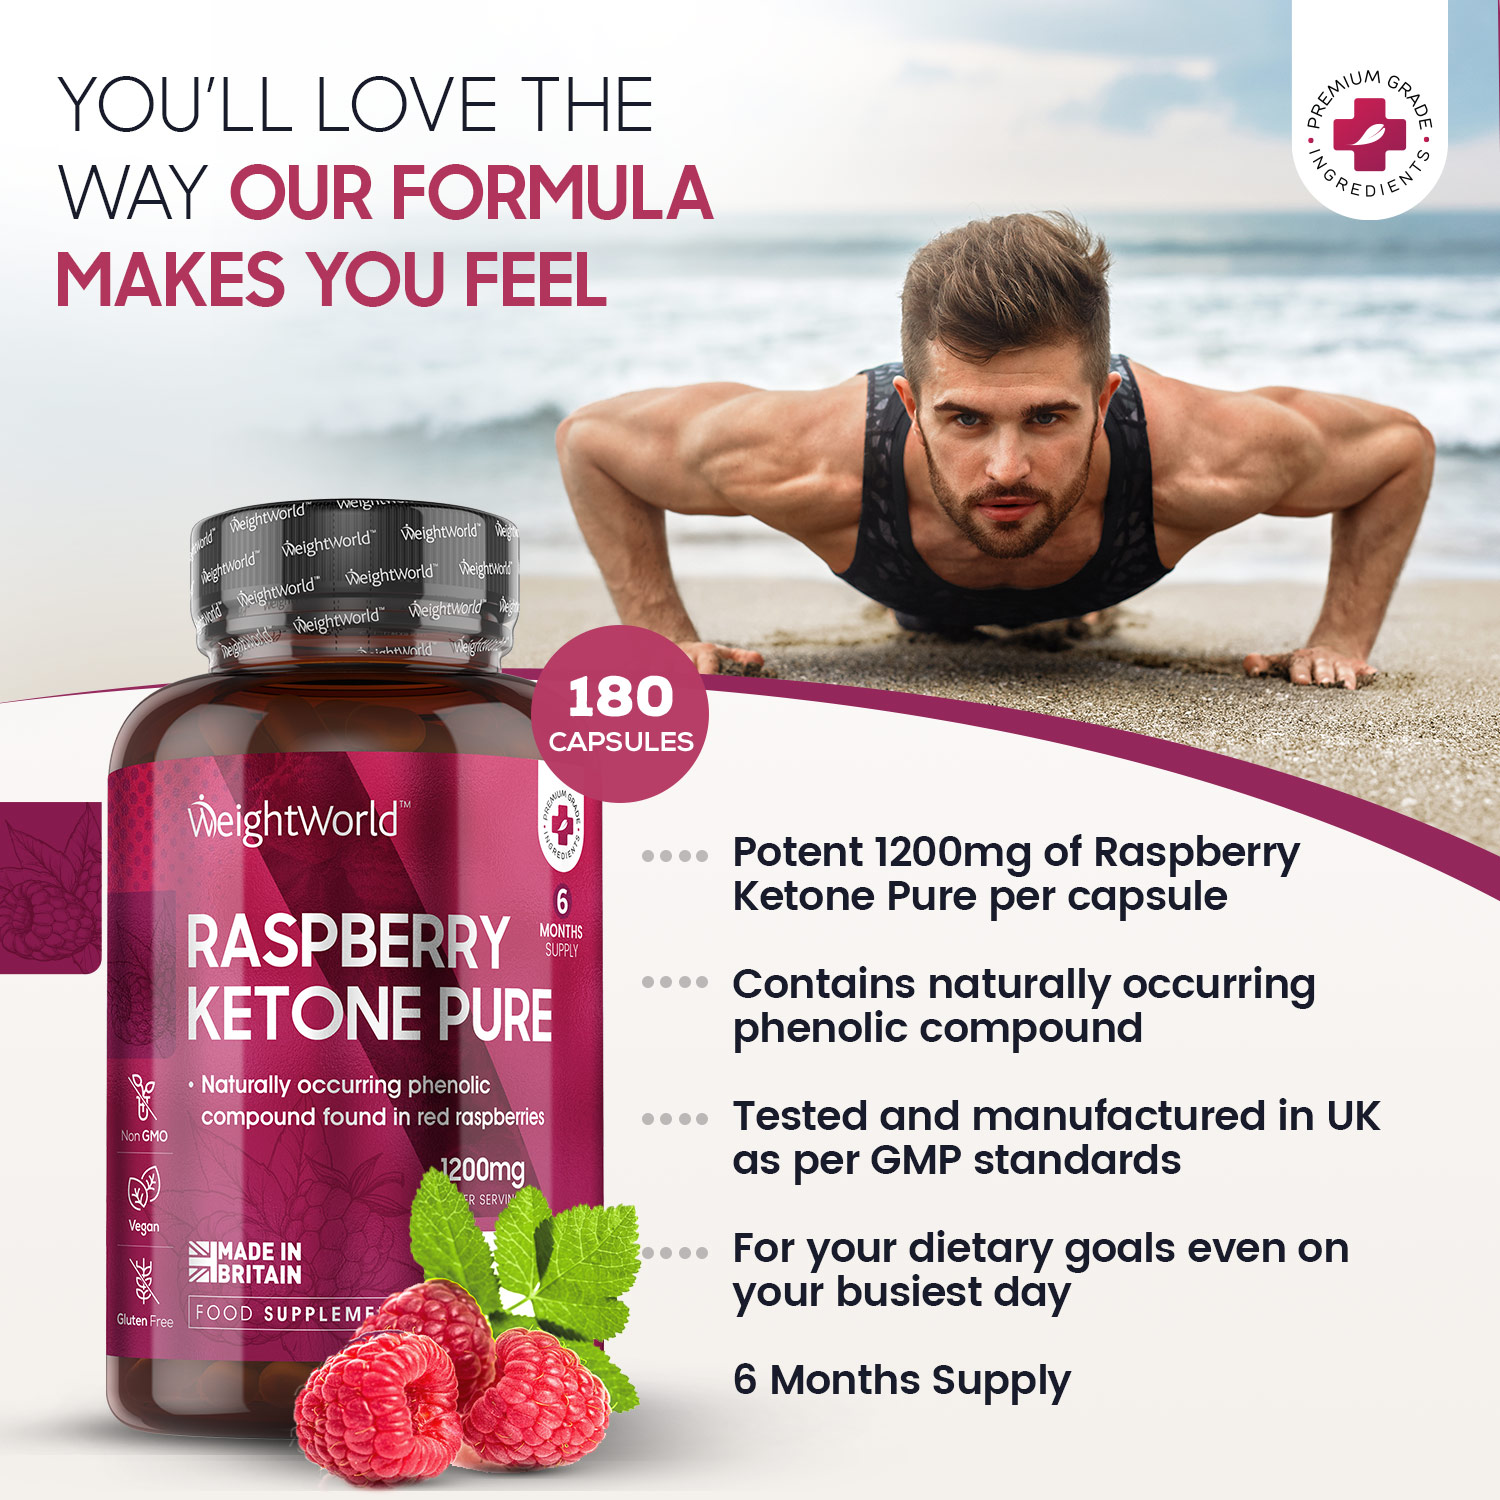 Raspberry Ketone Capsules from EarthBiotics - General Overview